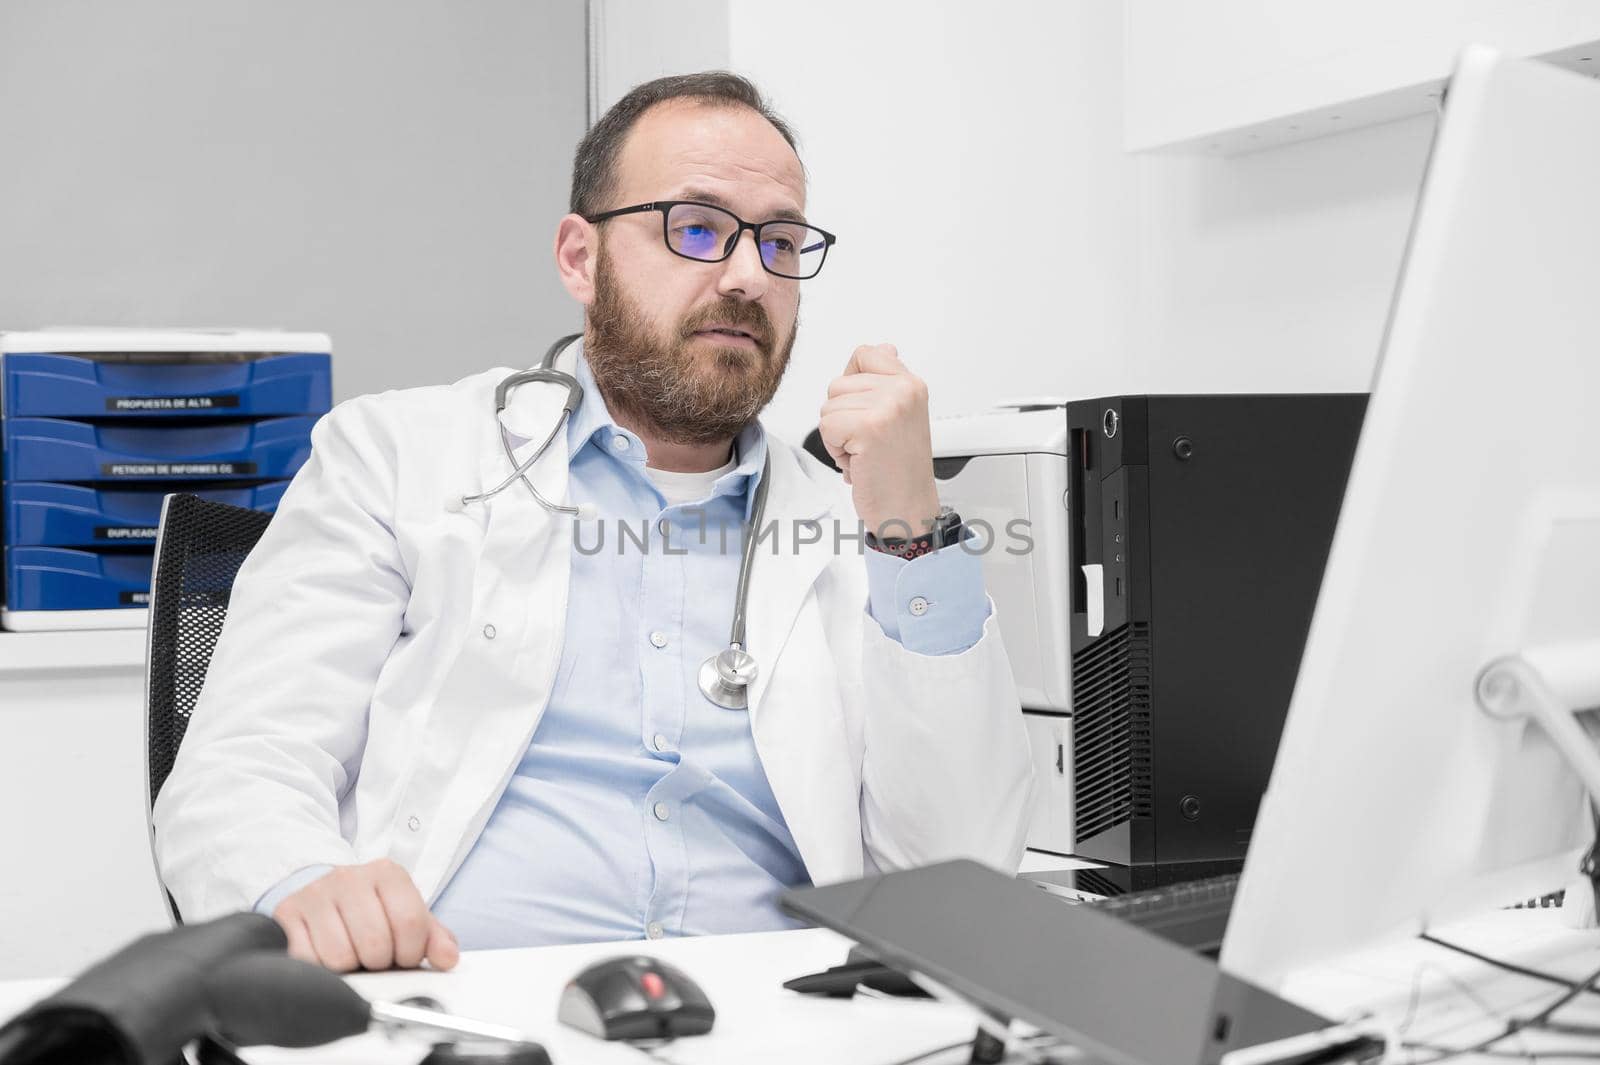 Portrait of friendly smiling healthcare professional therapist sitting at workplace. Happy confident male doctor physician wearing white medical coat and stethoscope. High quality photo